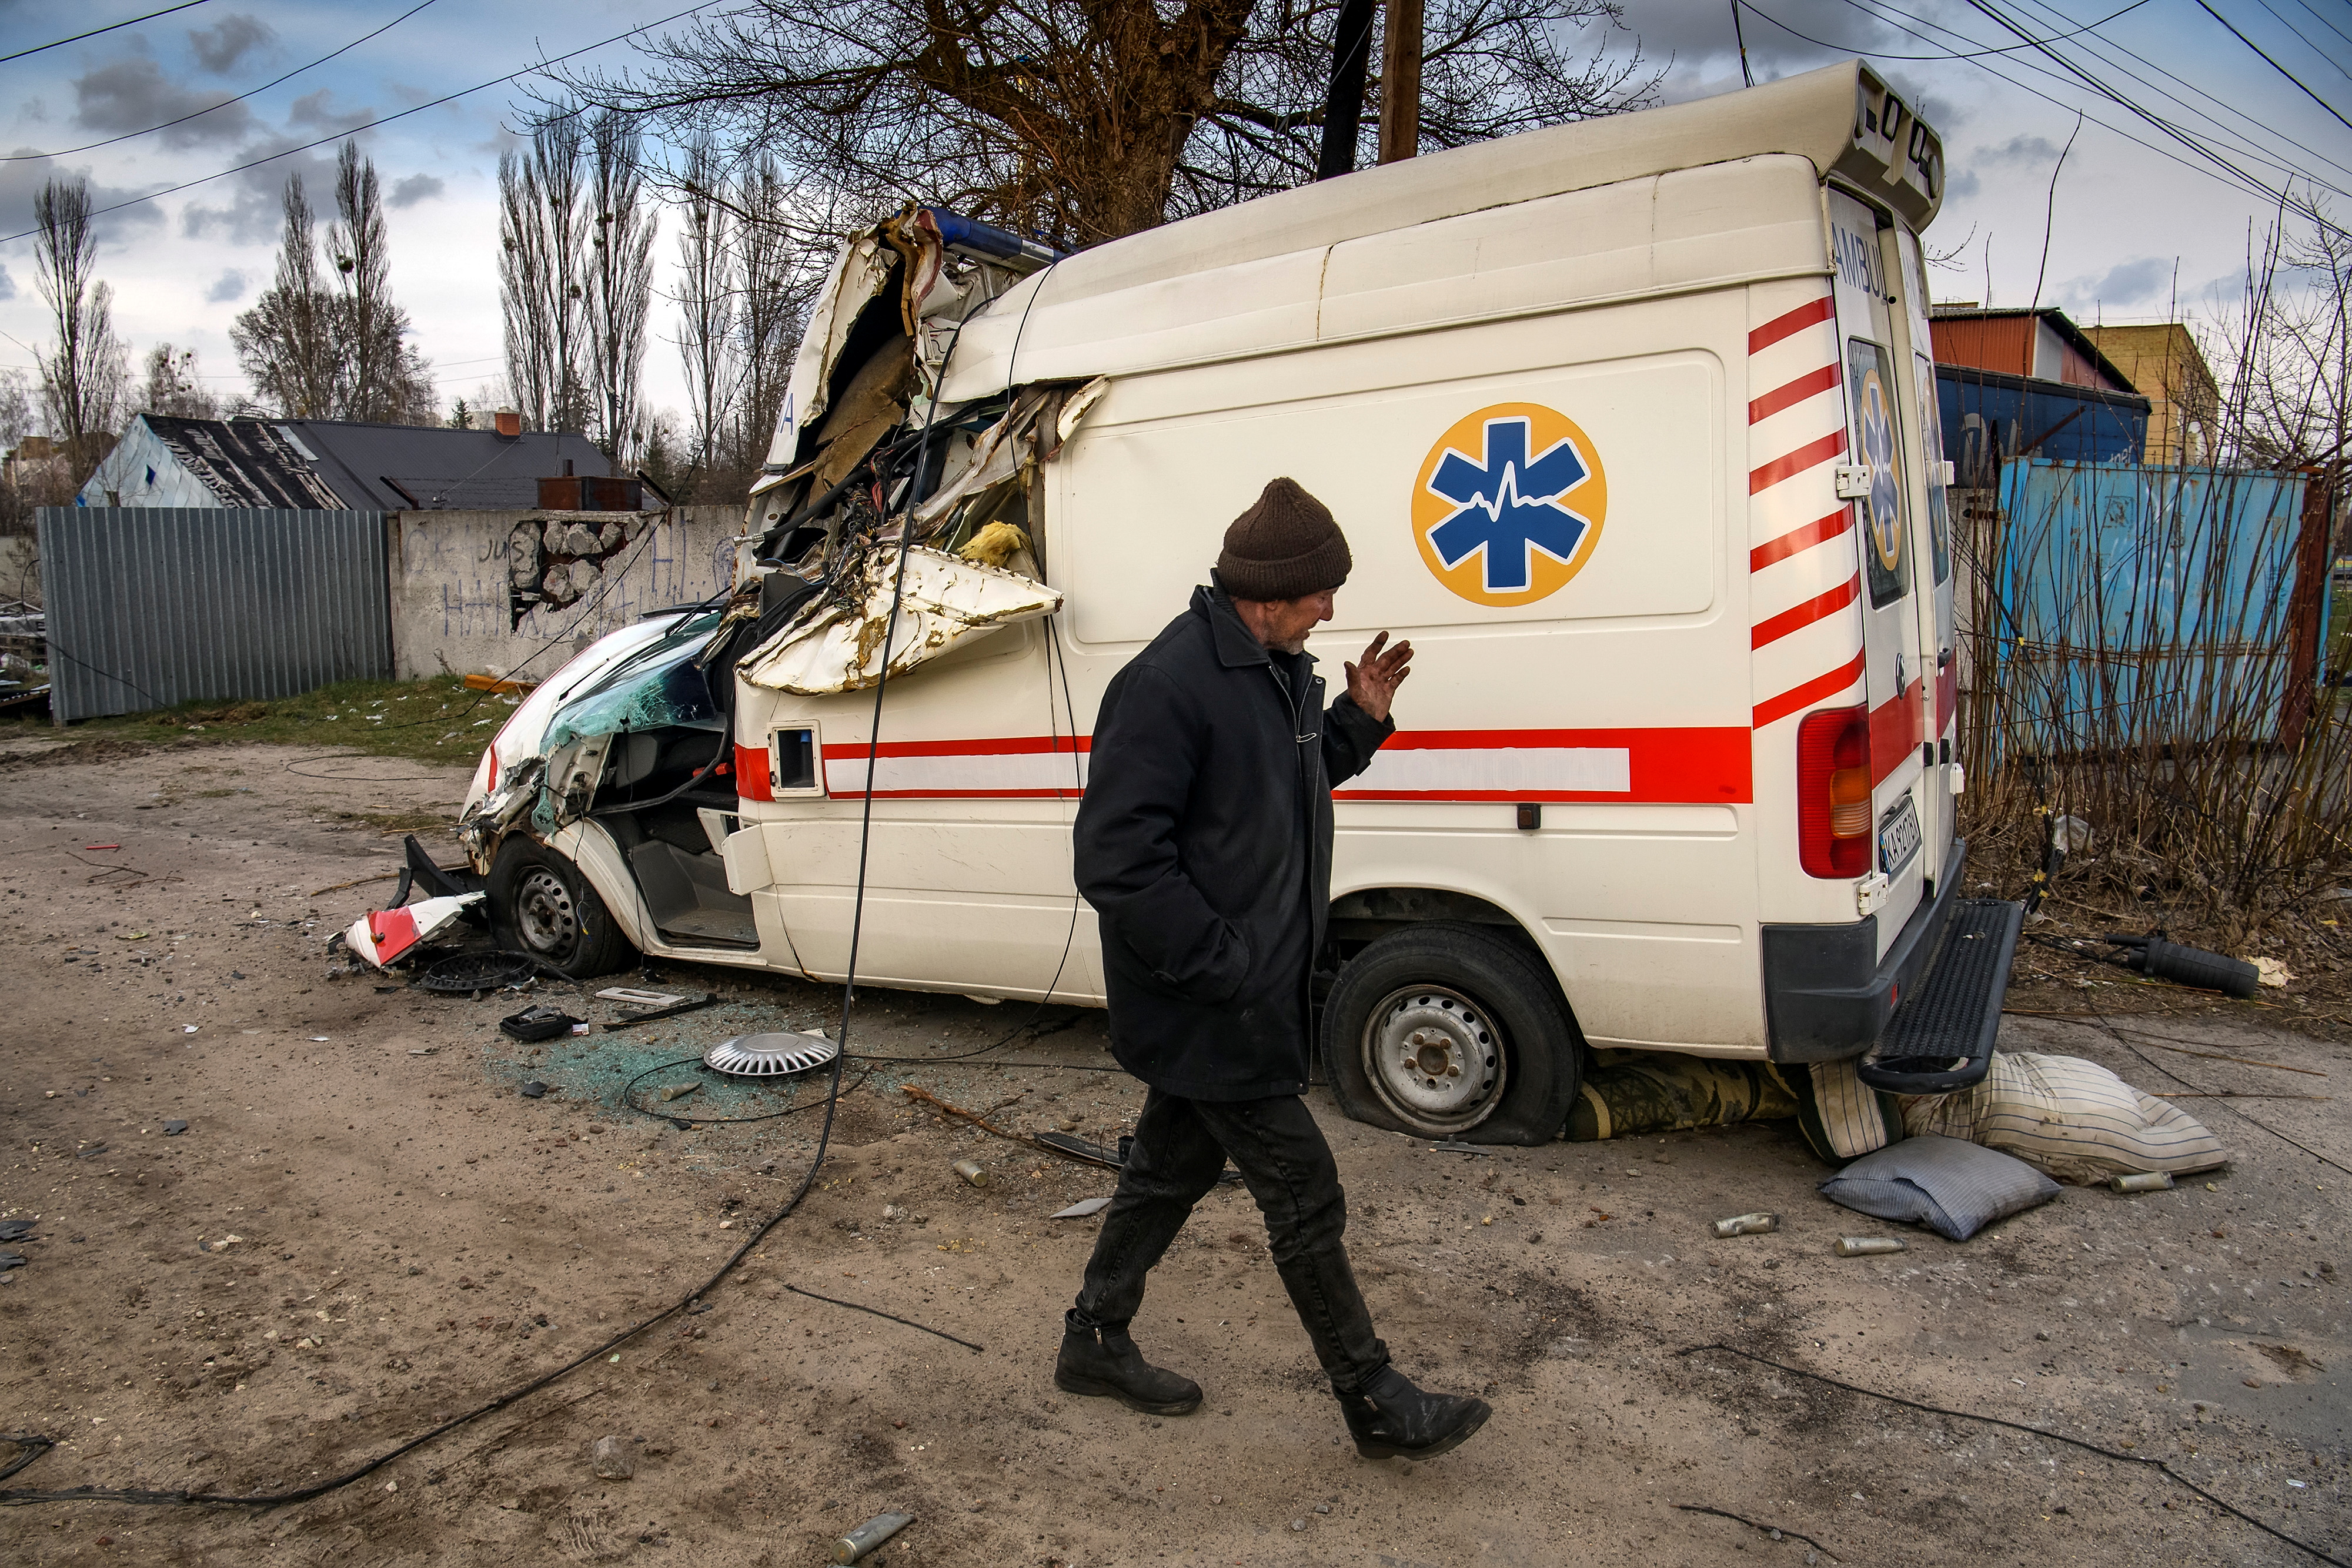 A local man walks past a damaged ambulance in the settlement of Hostomel